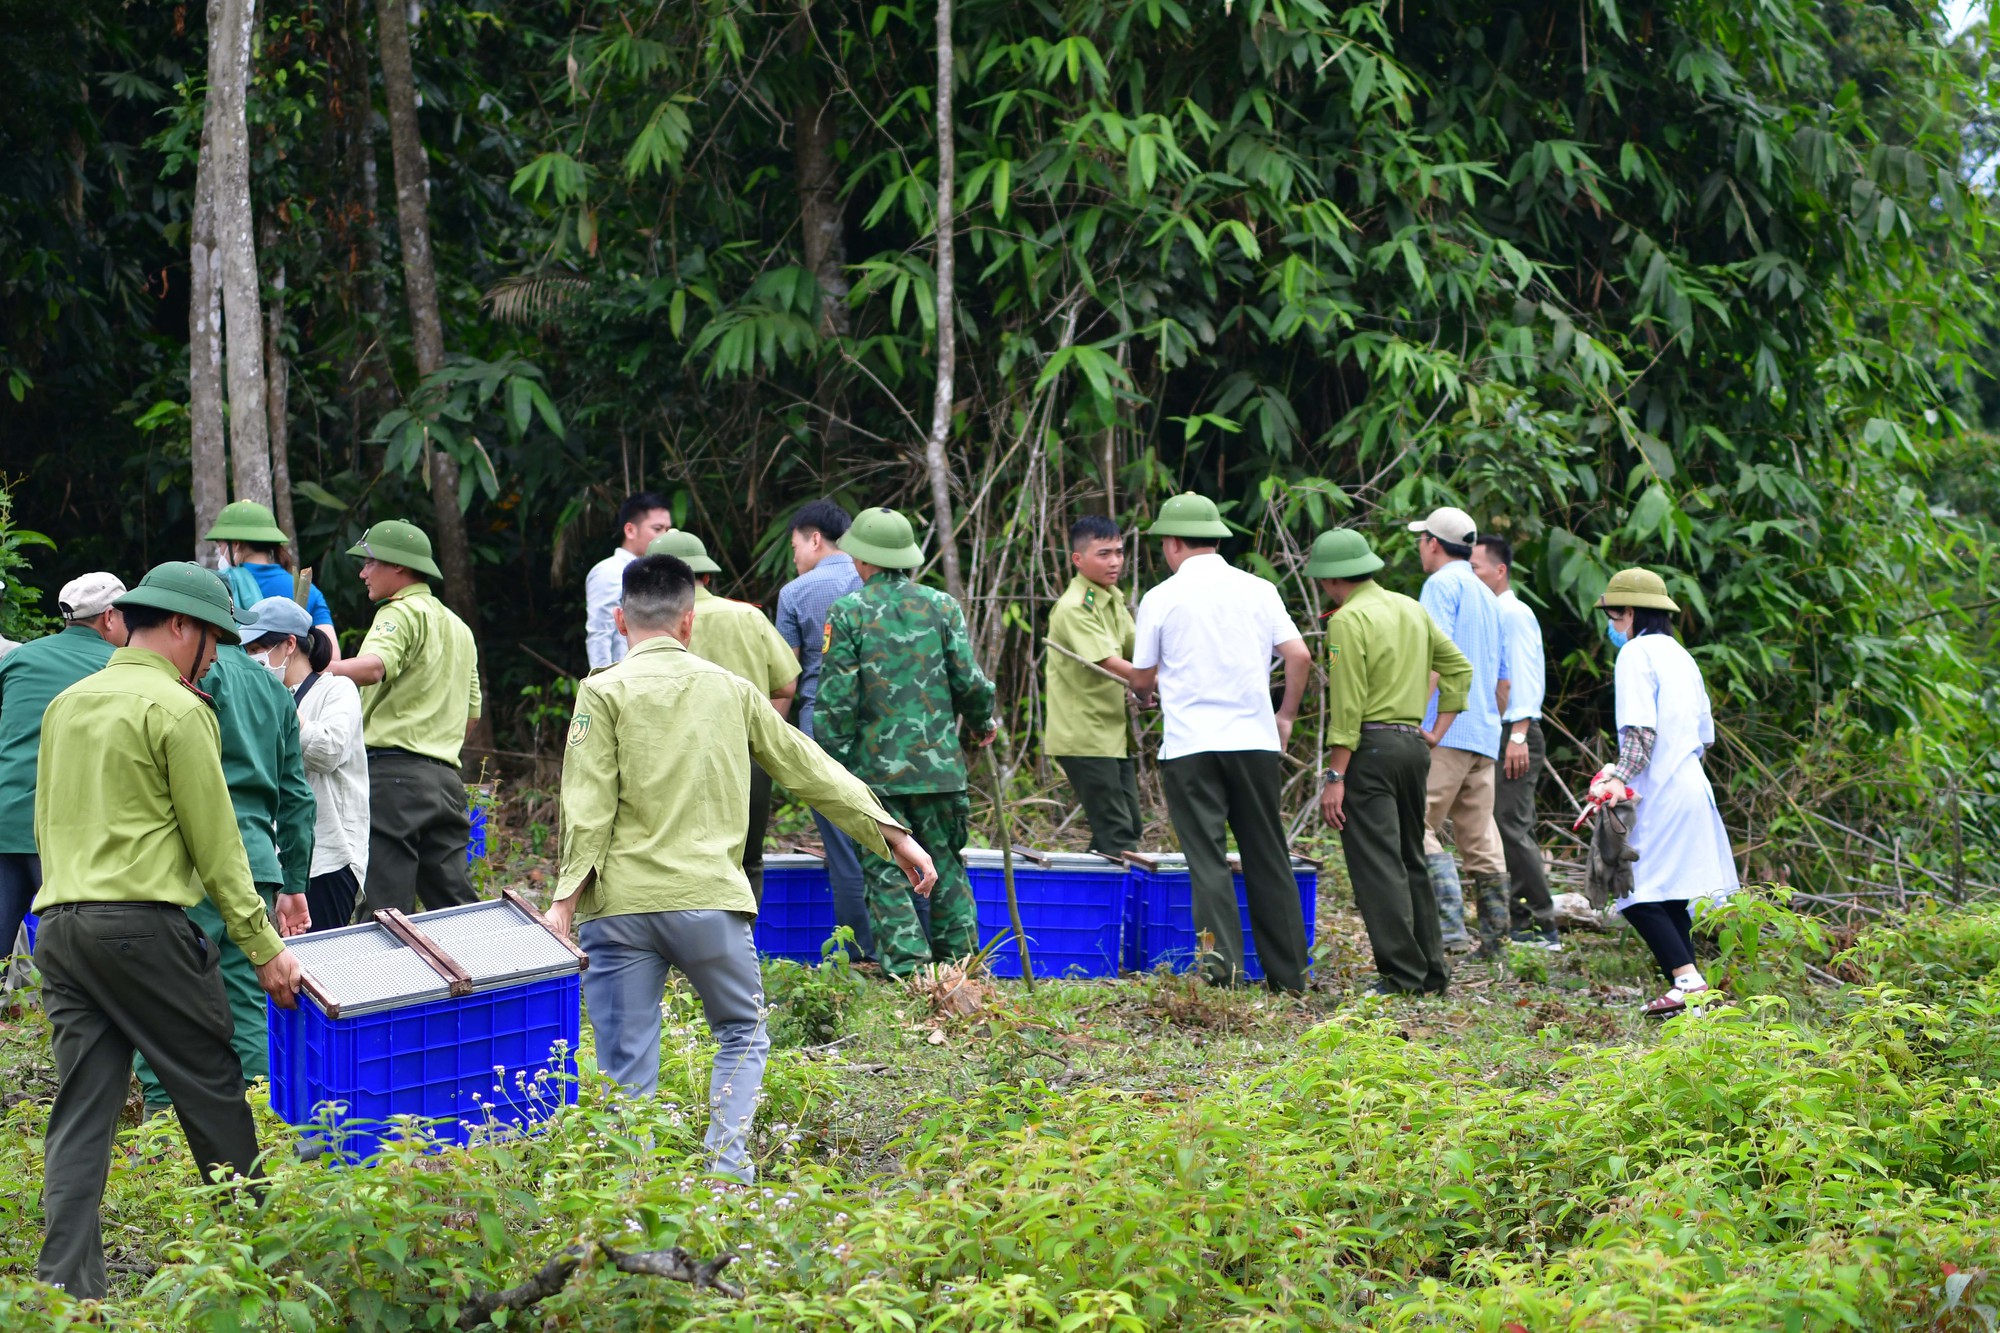 Cobras, pythons, monkeys and many rare individuals were released into the forest by Cuc Phuong National Park - Photo 7.